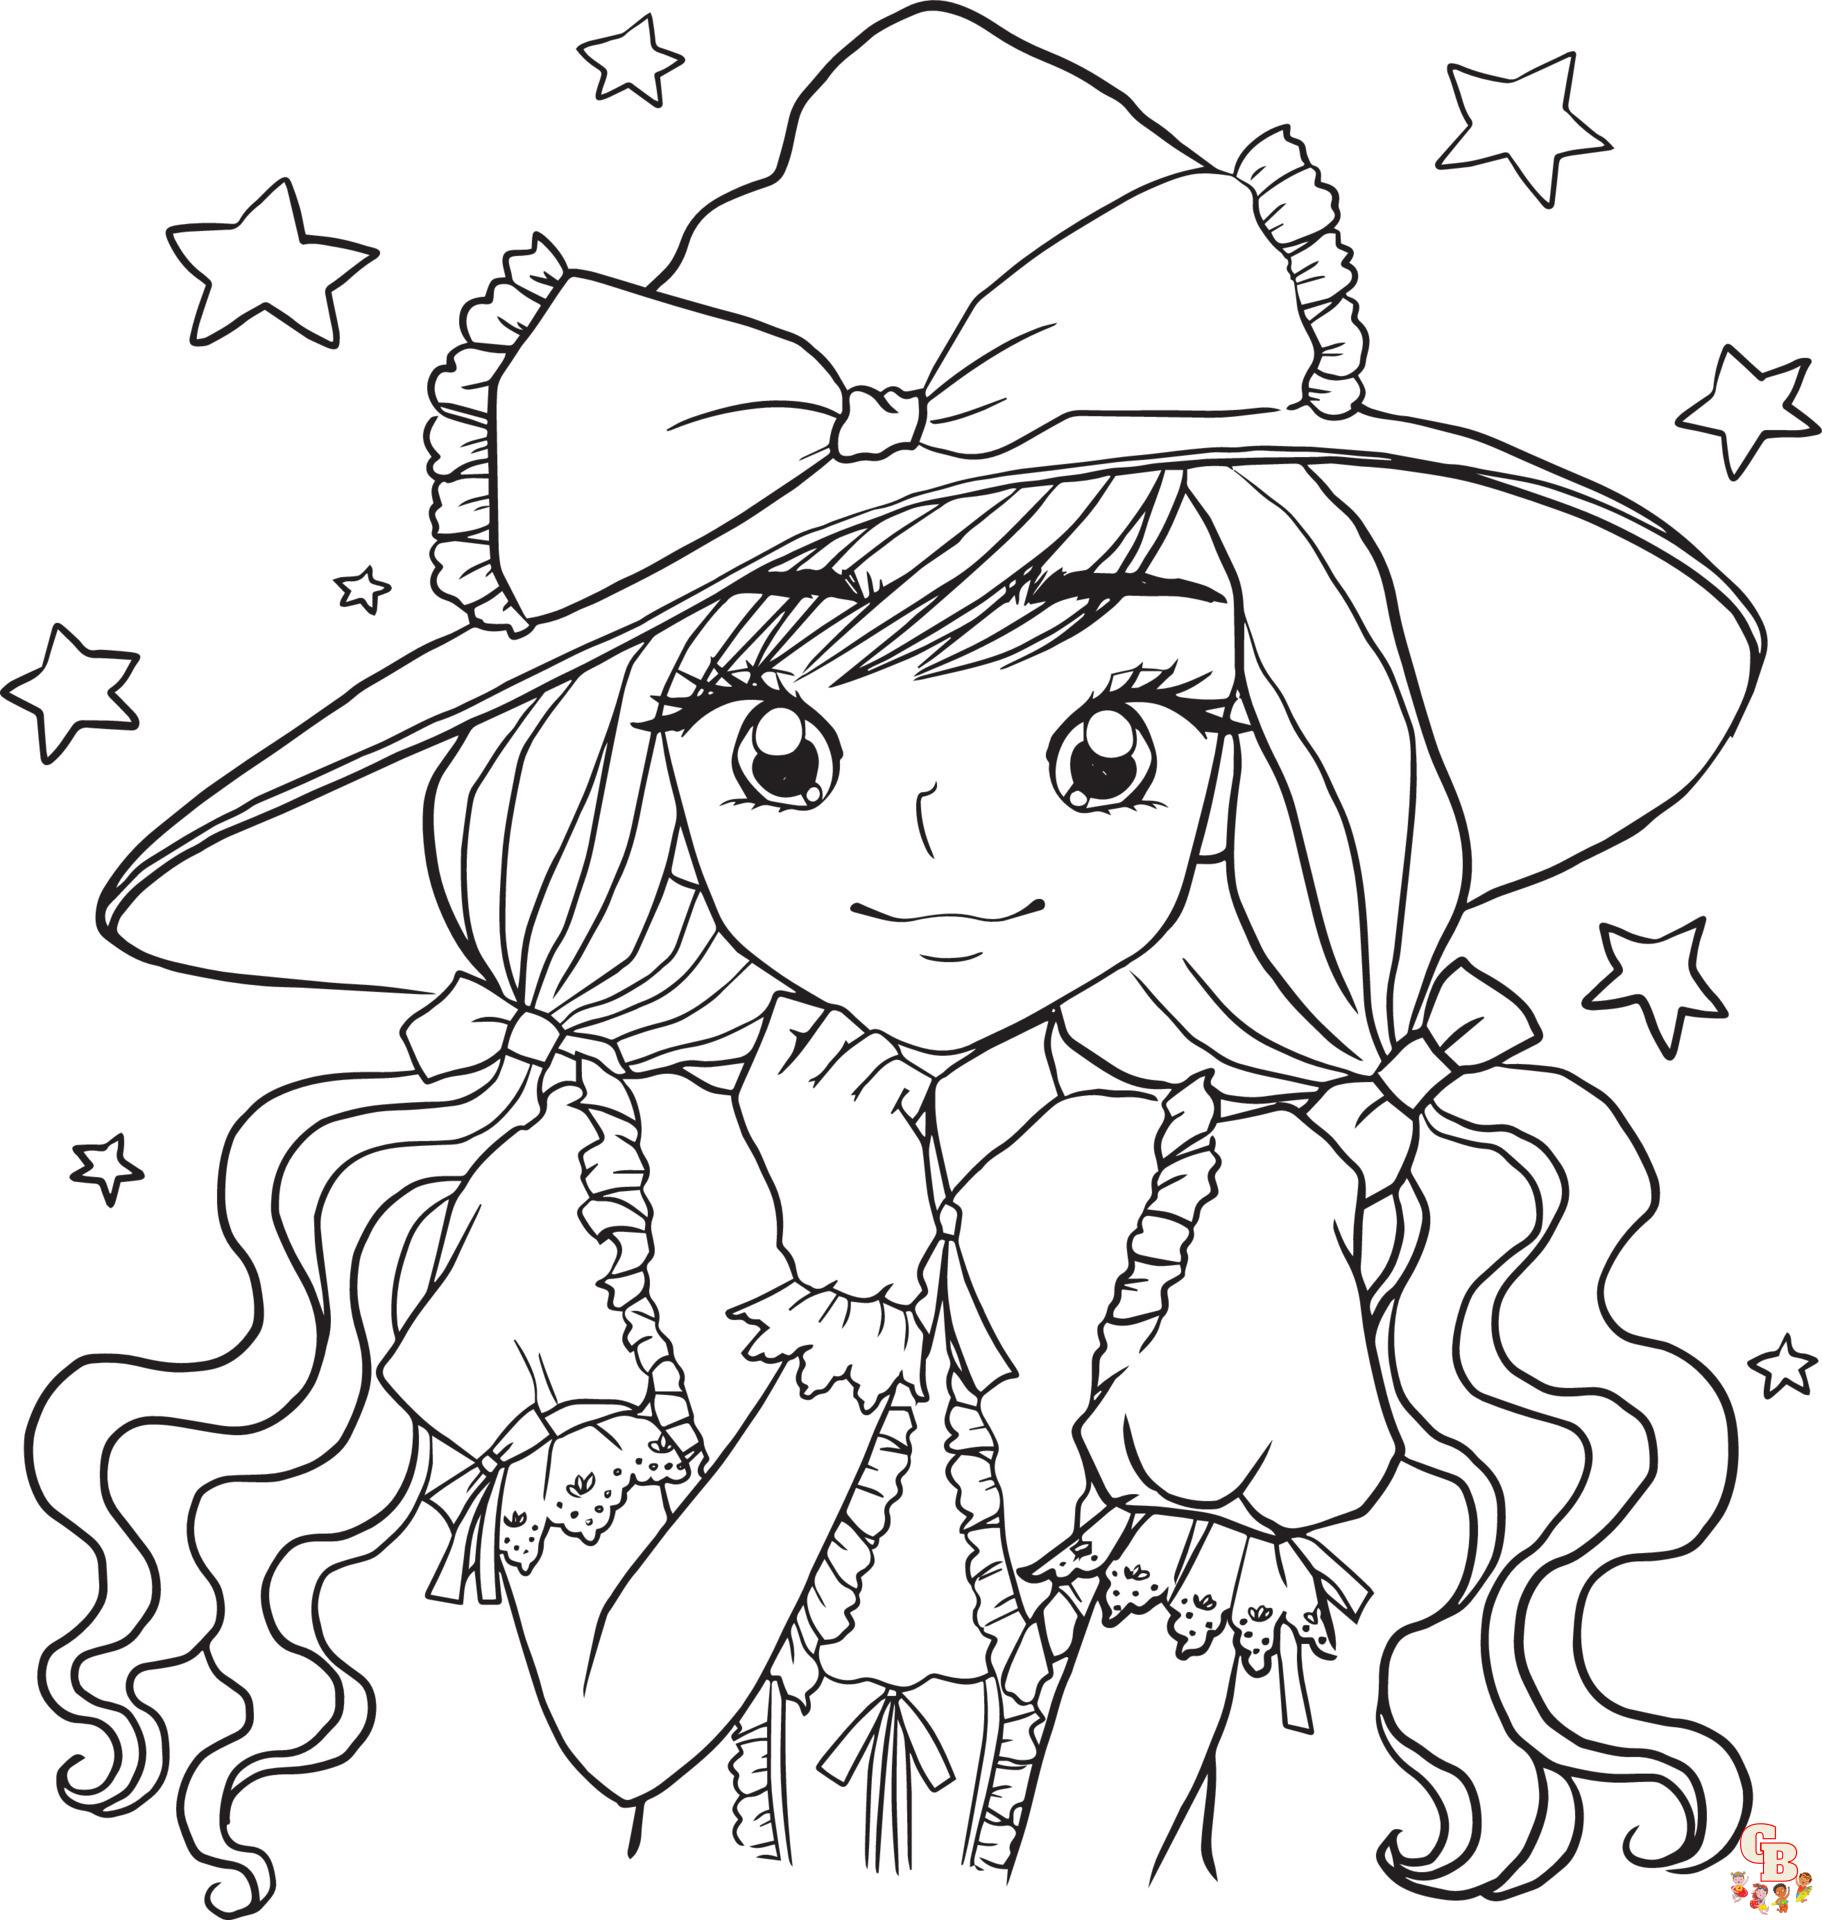 20+ Free Printable Anime Girl Coloring Pages - EverFreeColoring.com